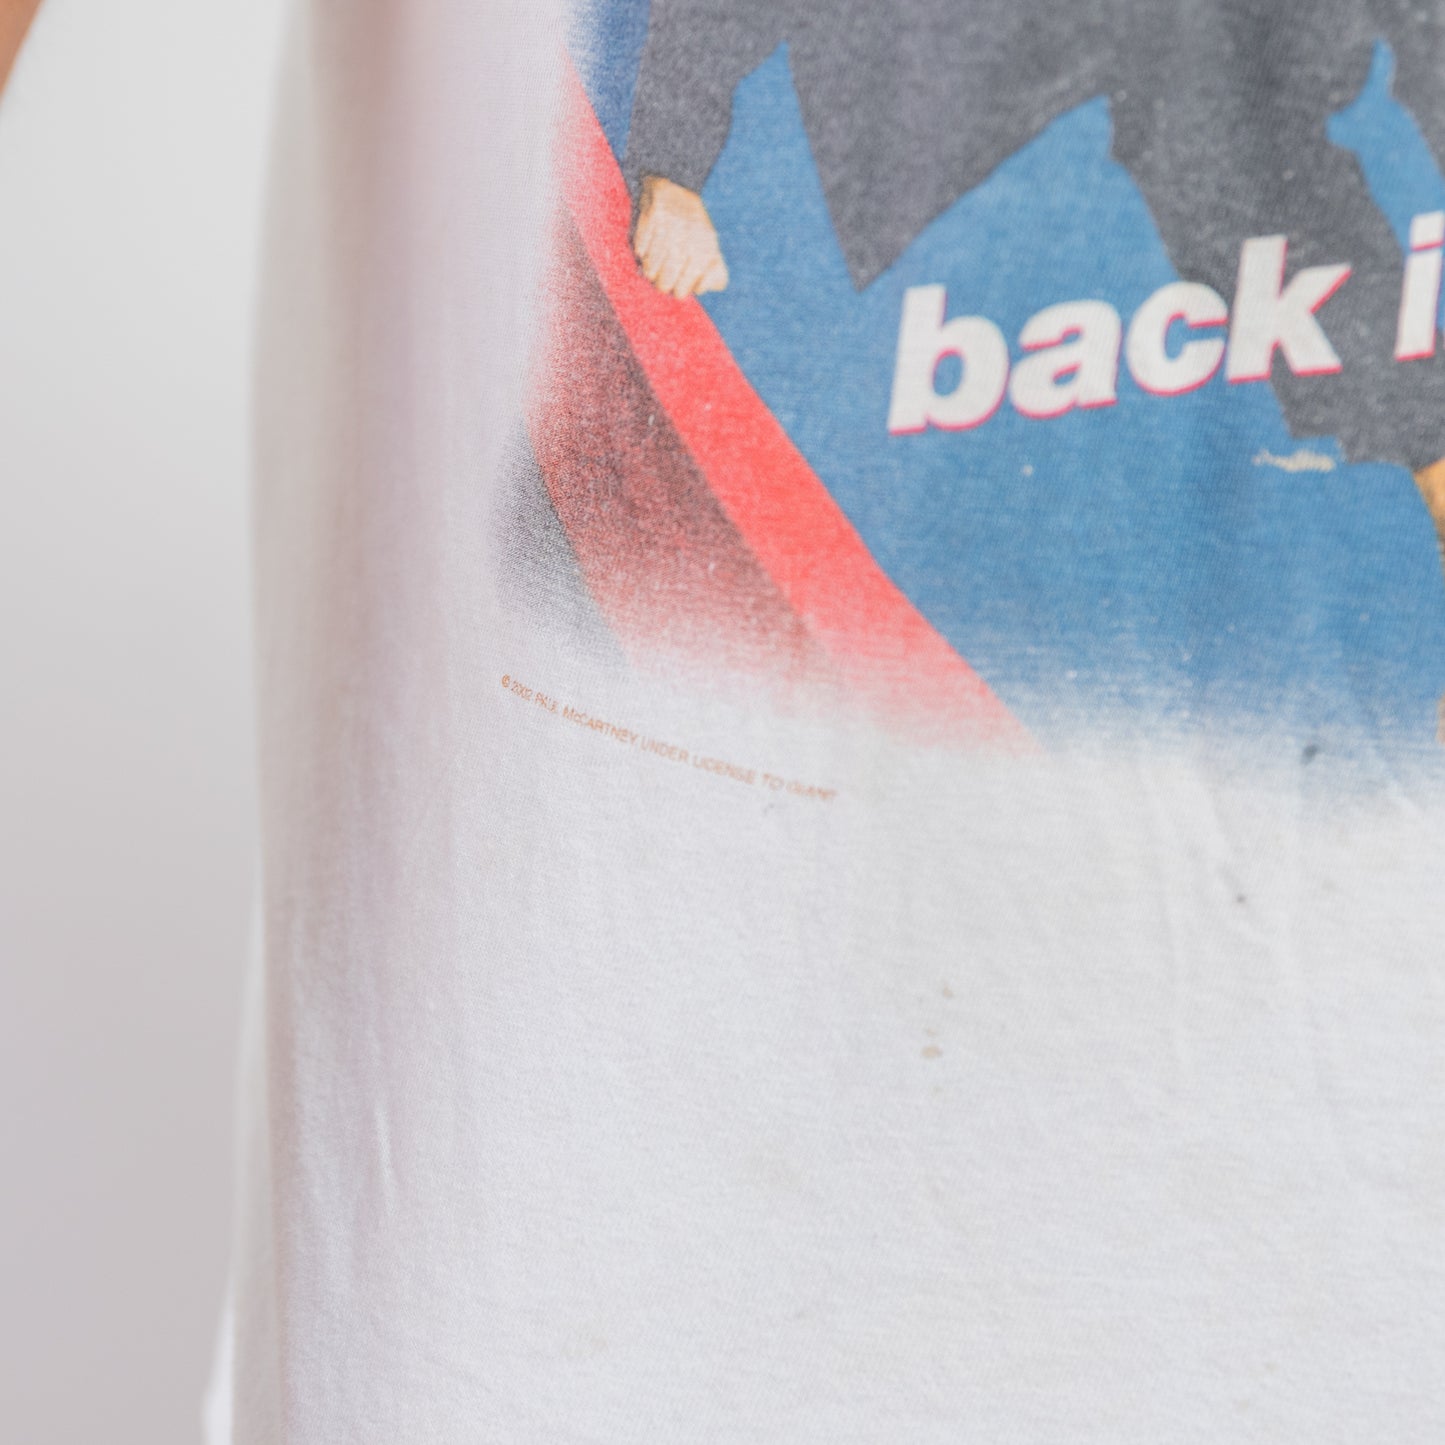 2002 Paul McCartney Back In The US Tour Tee